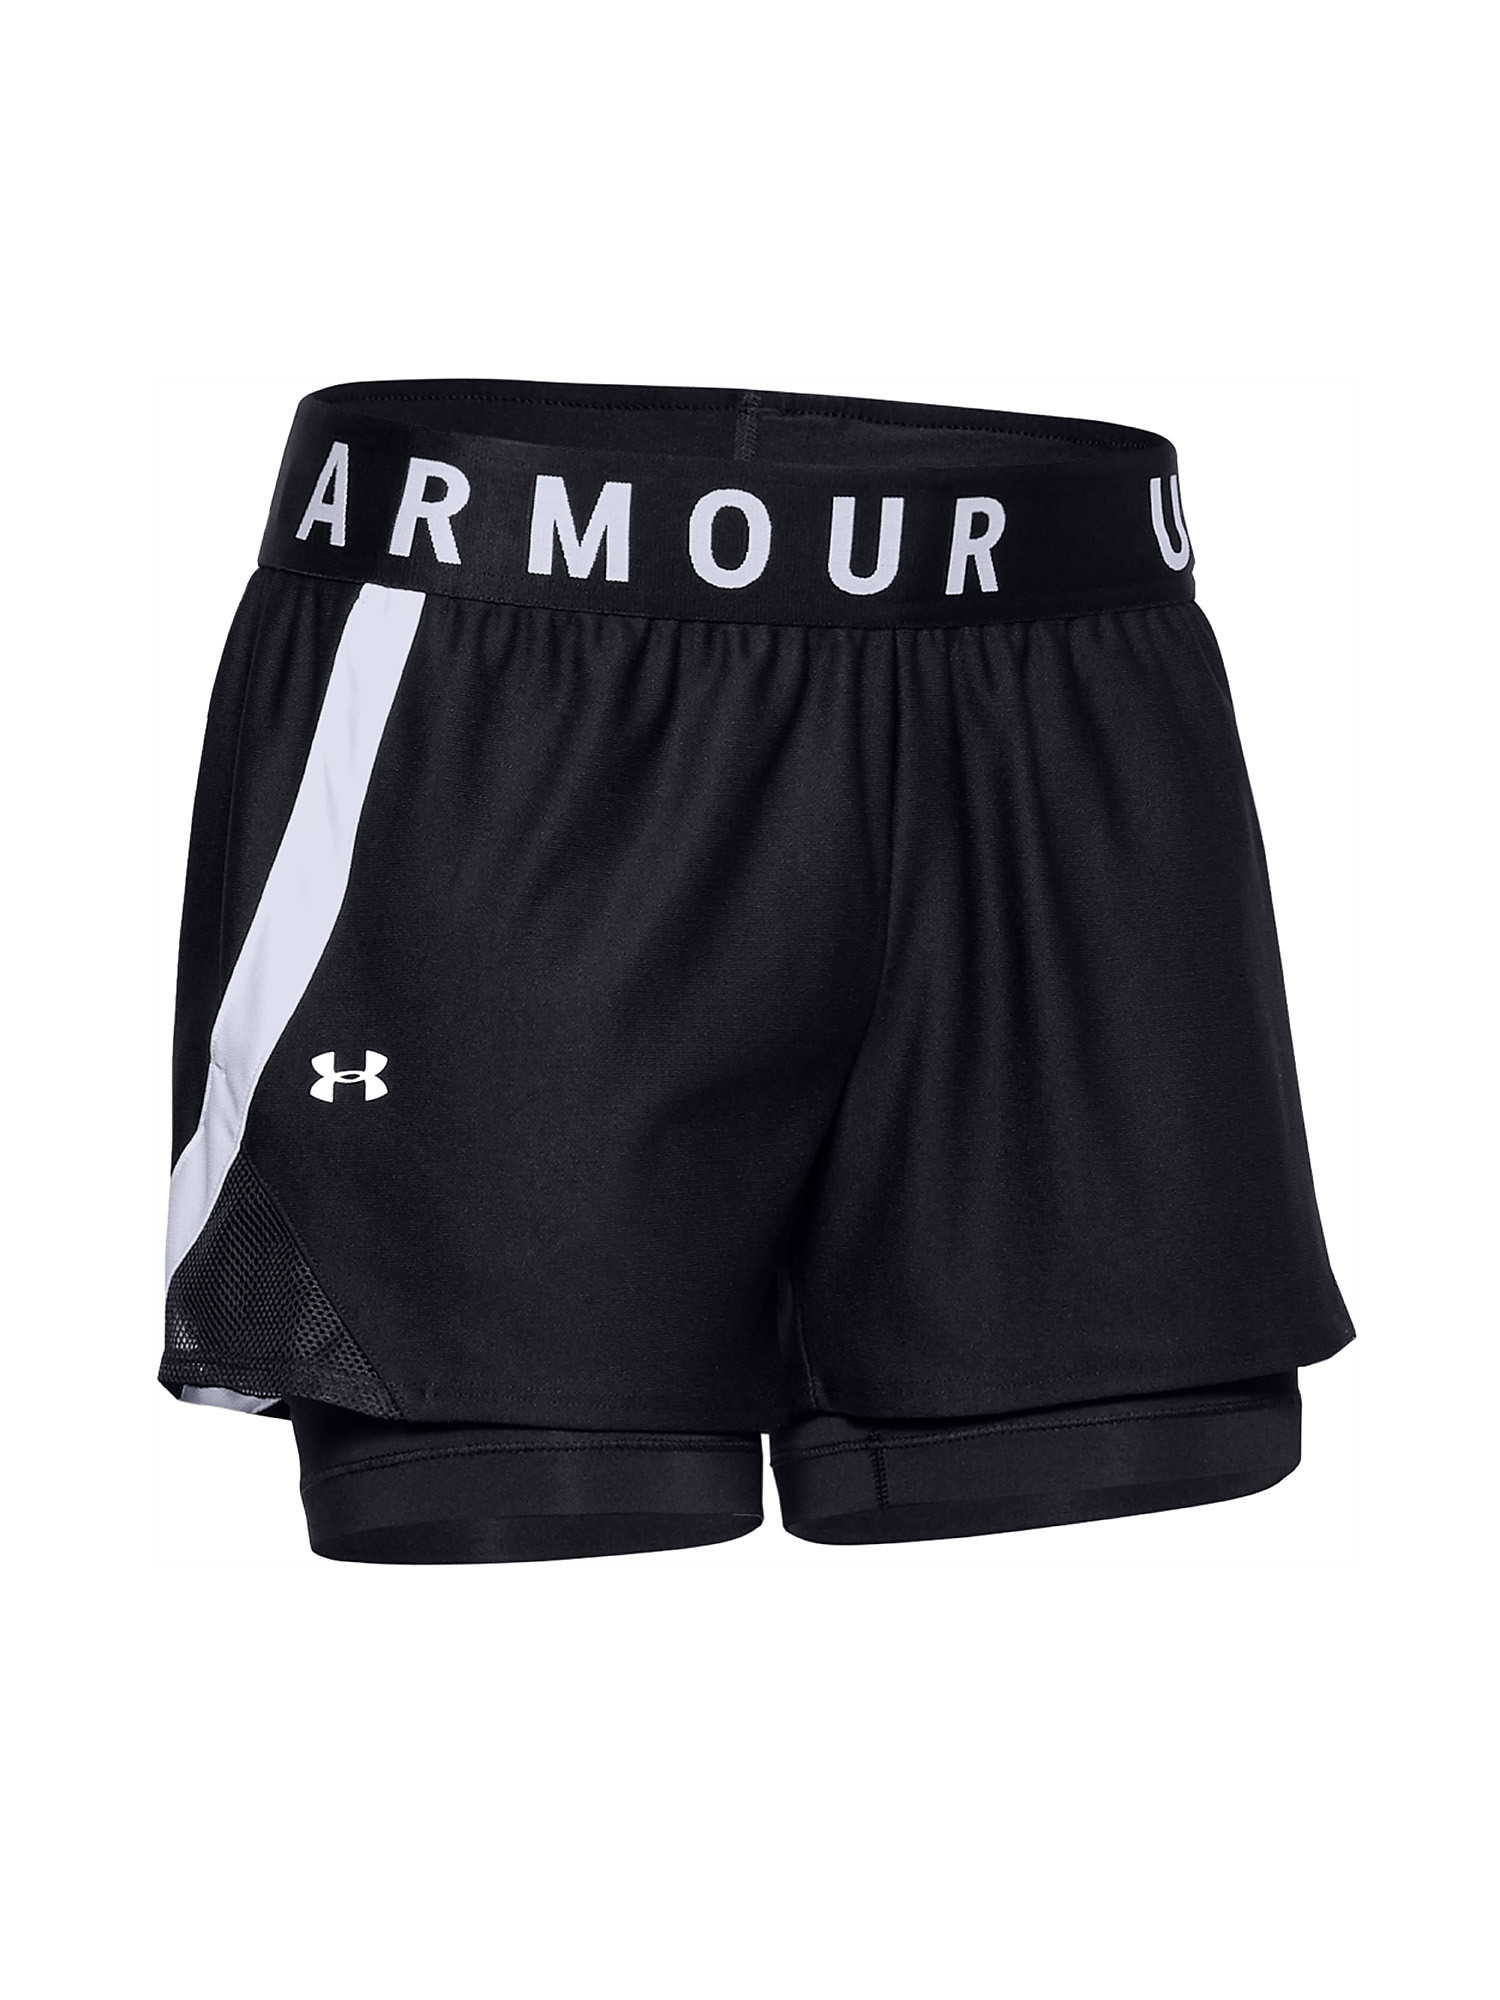 Under Armour - Shorts UA Play Up 2 in 1, Nero, large image number 0